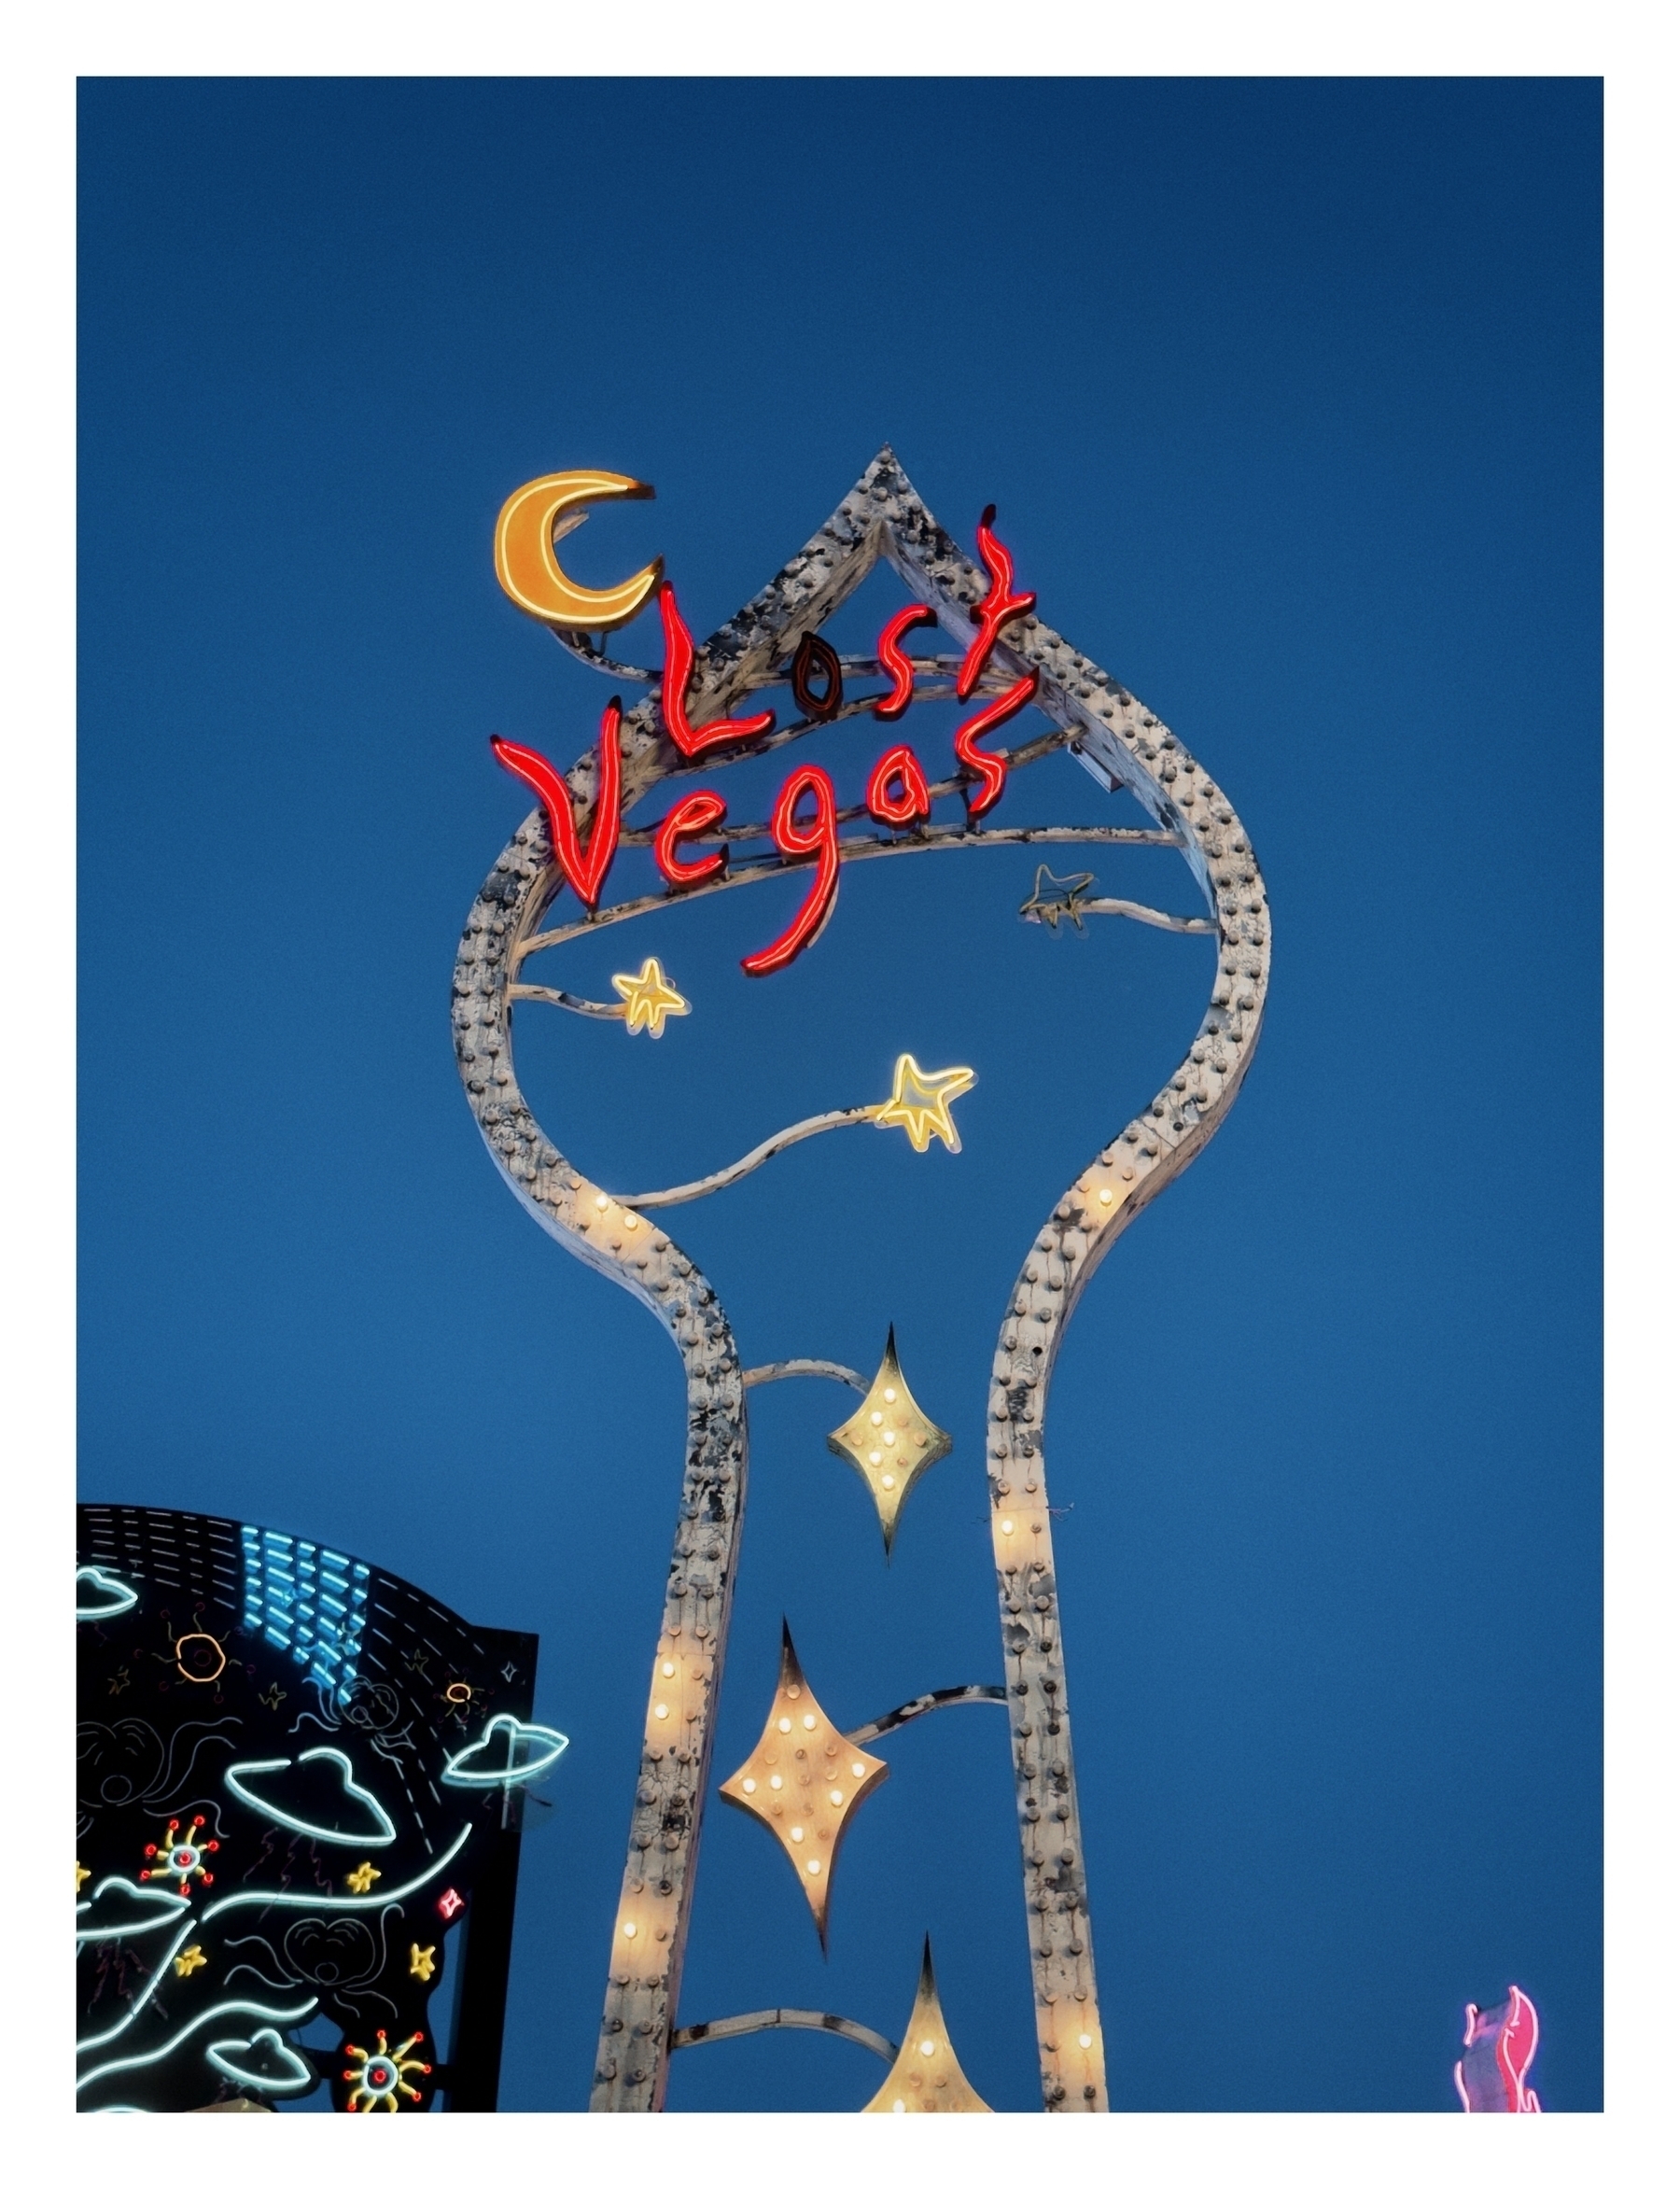 A neon sign reads “lost Vegas” atop a stylized structure, set against a blue sky. Below are illuminated stars and an animated building façade with neon graphics.